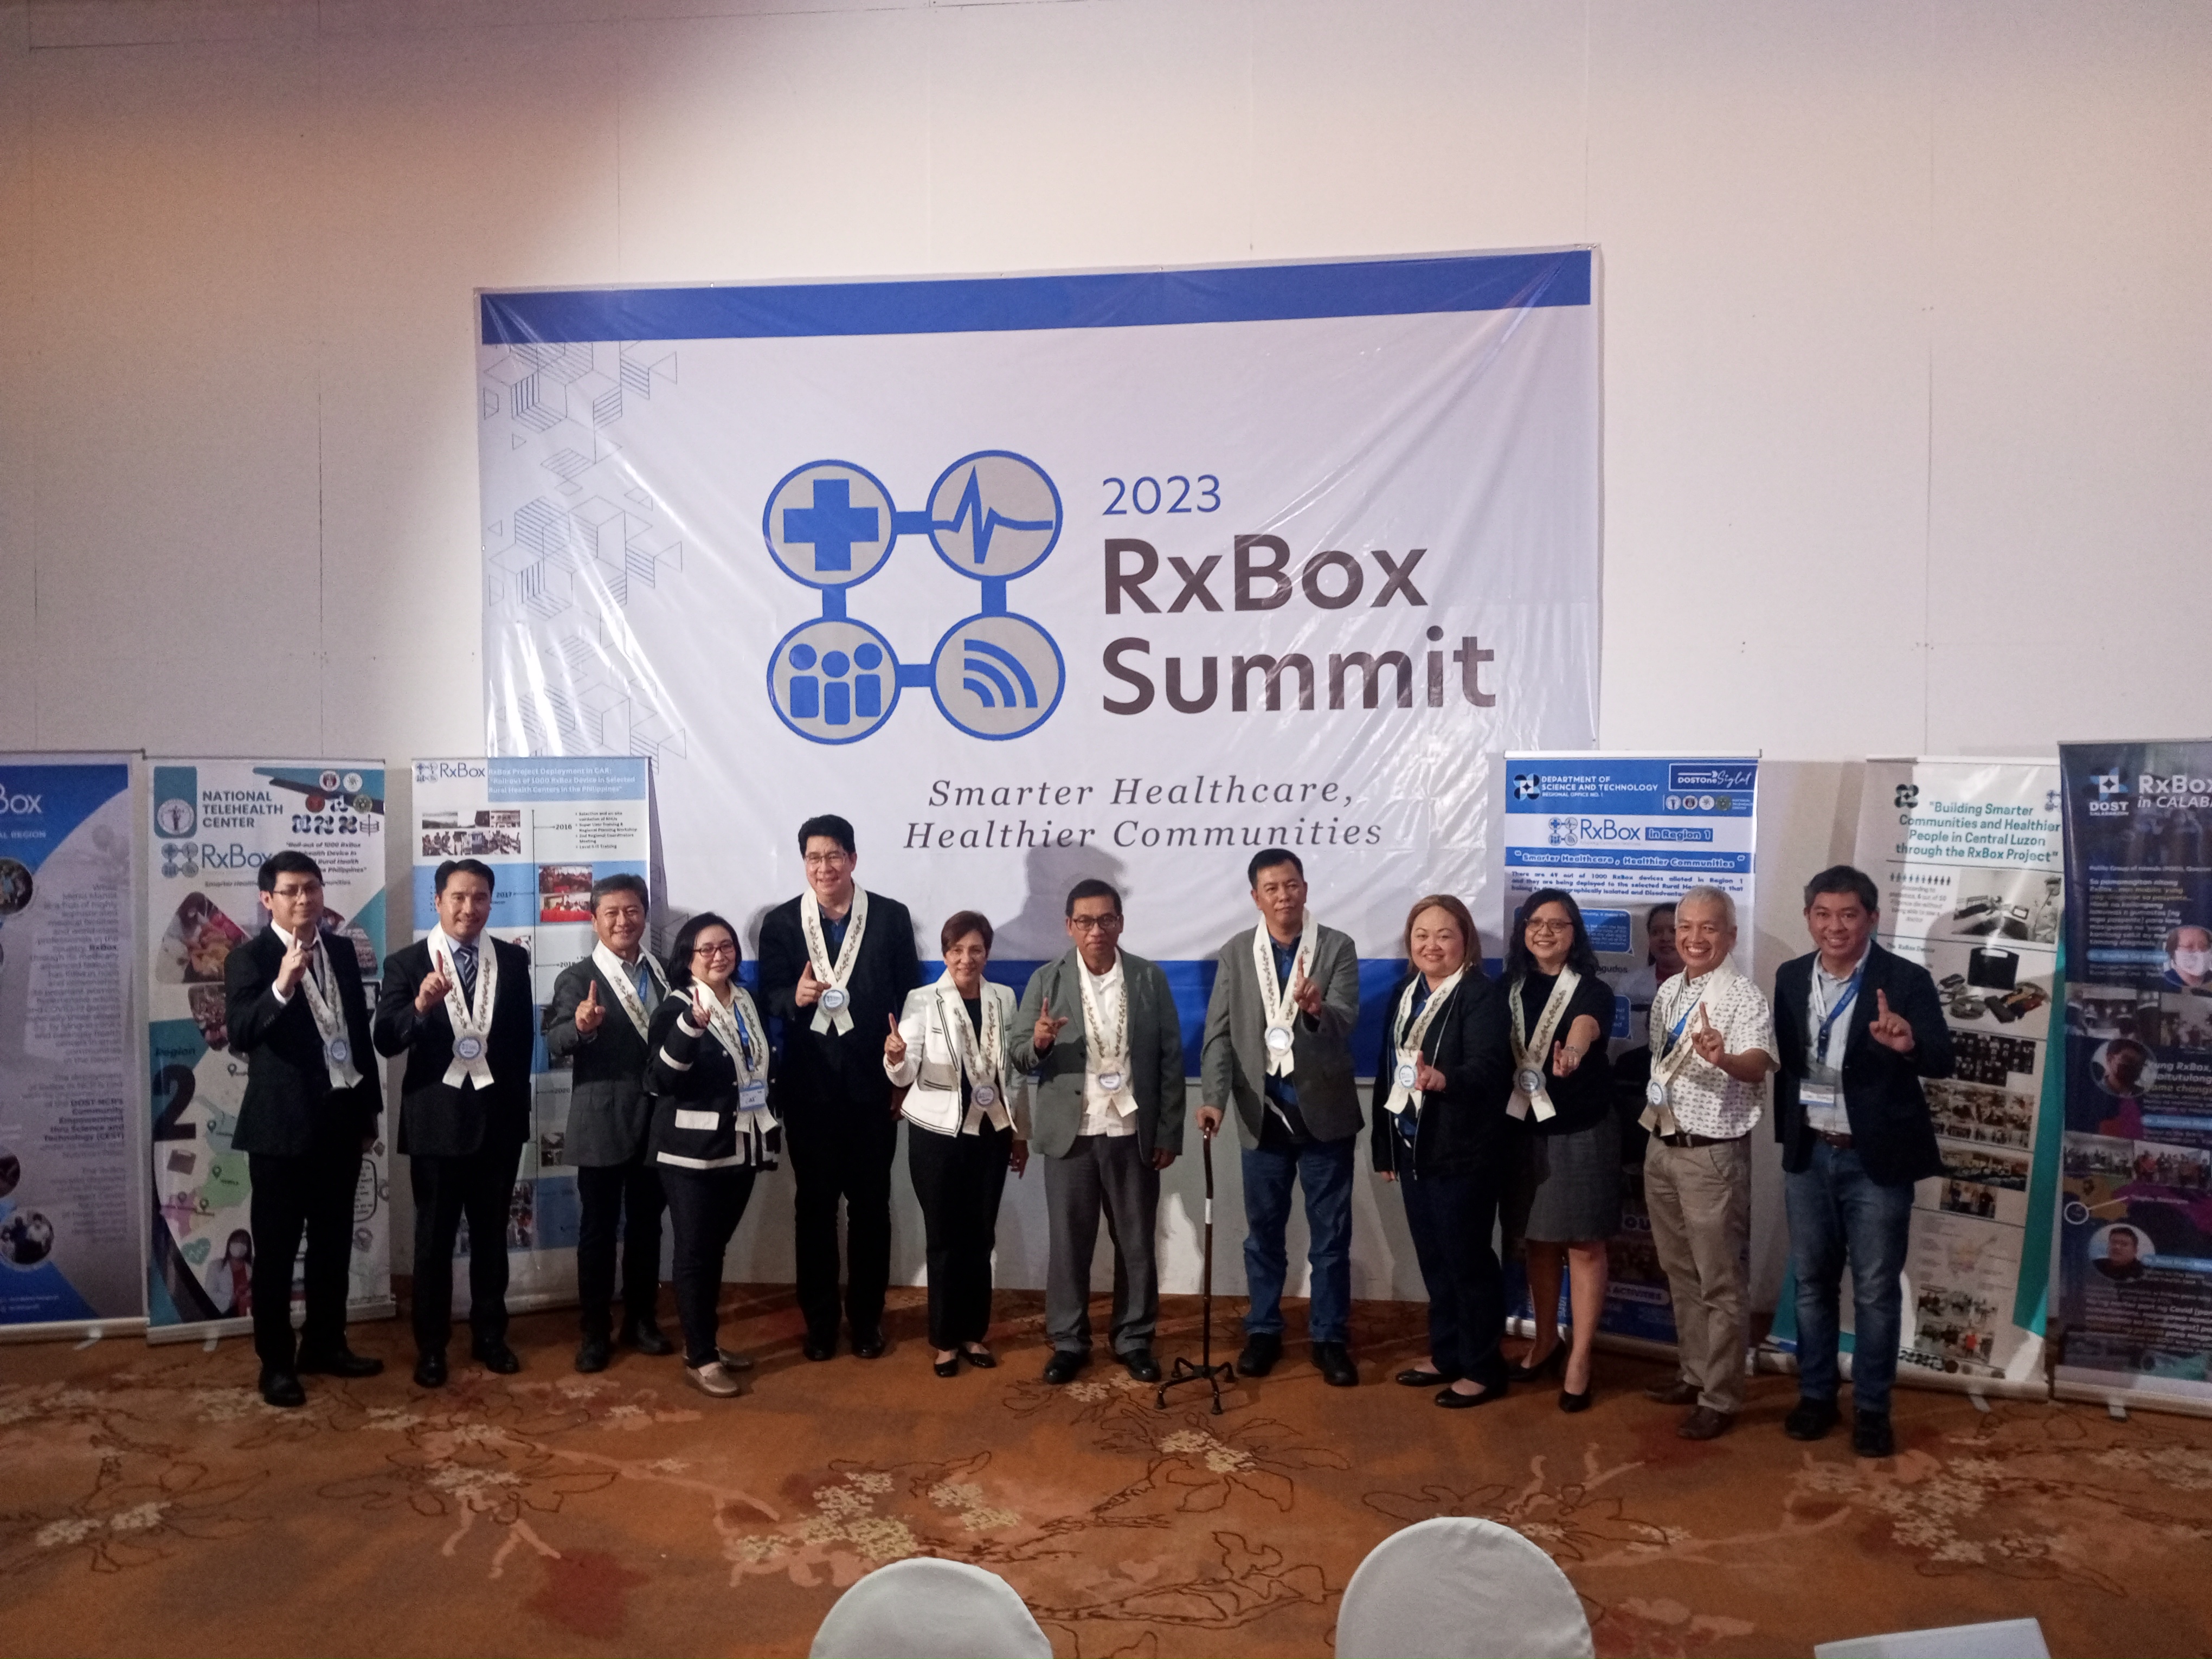 DOST’s Roll-out of 1000 RxBox units to PH healthcare facilities almost complete